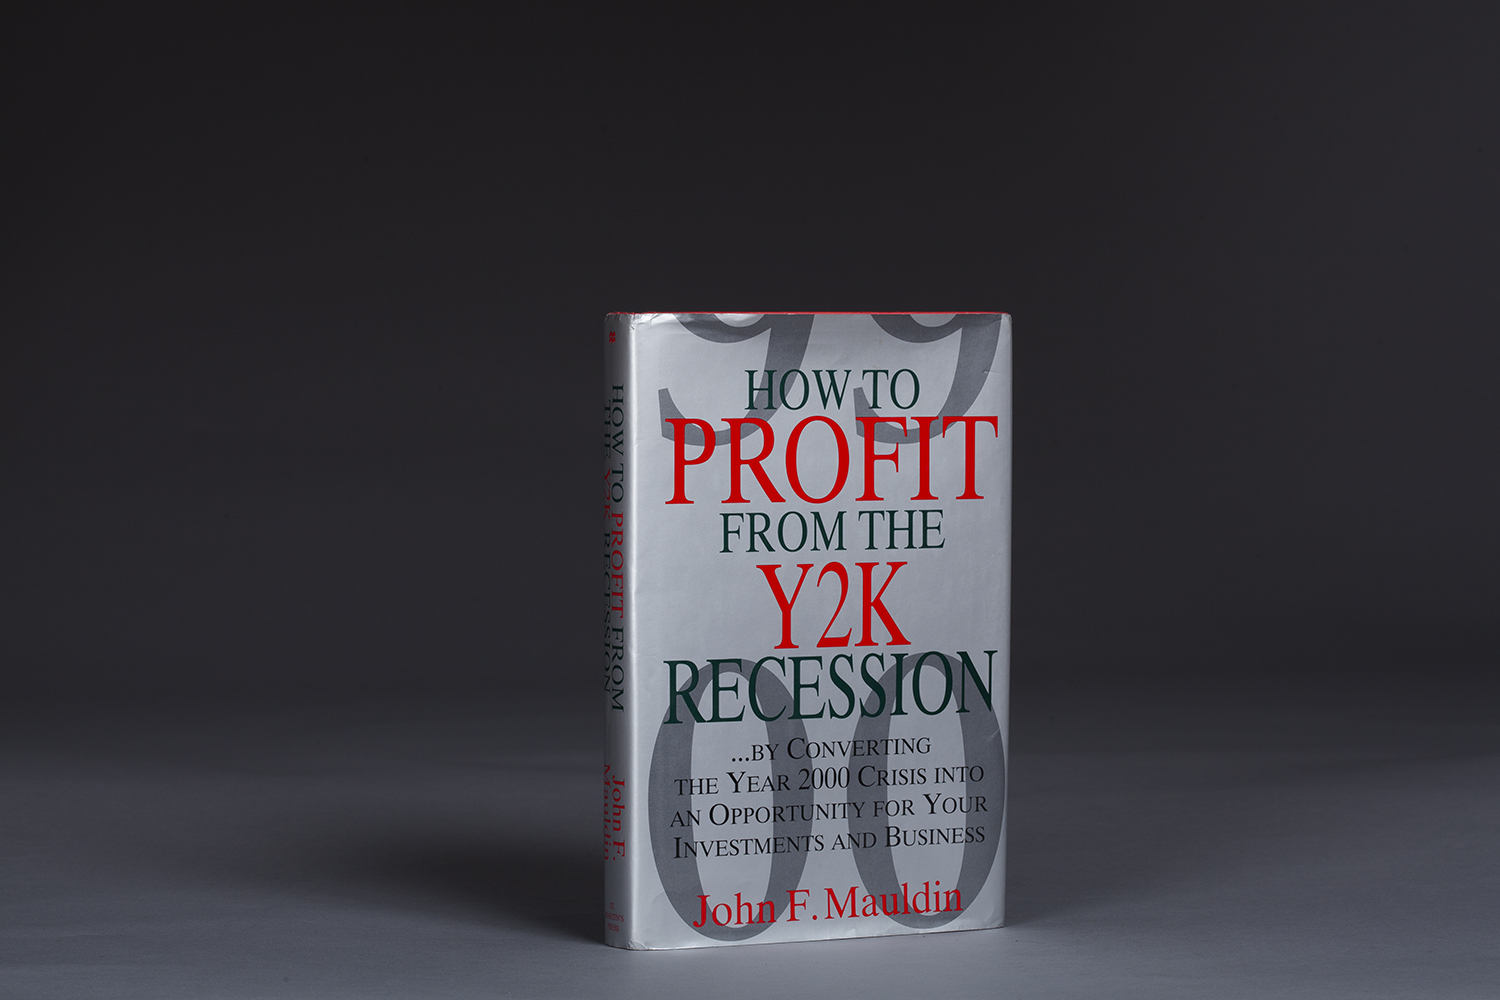 How to Profit from the Y2K Recession - 0010 Cover.jpg